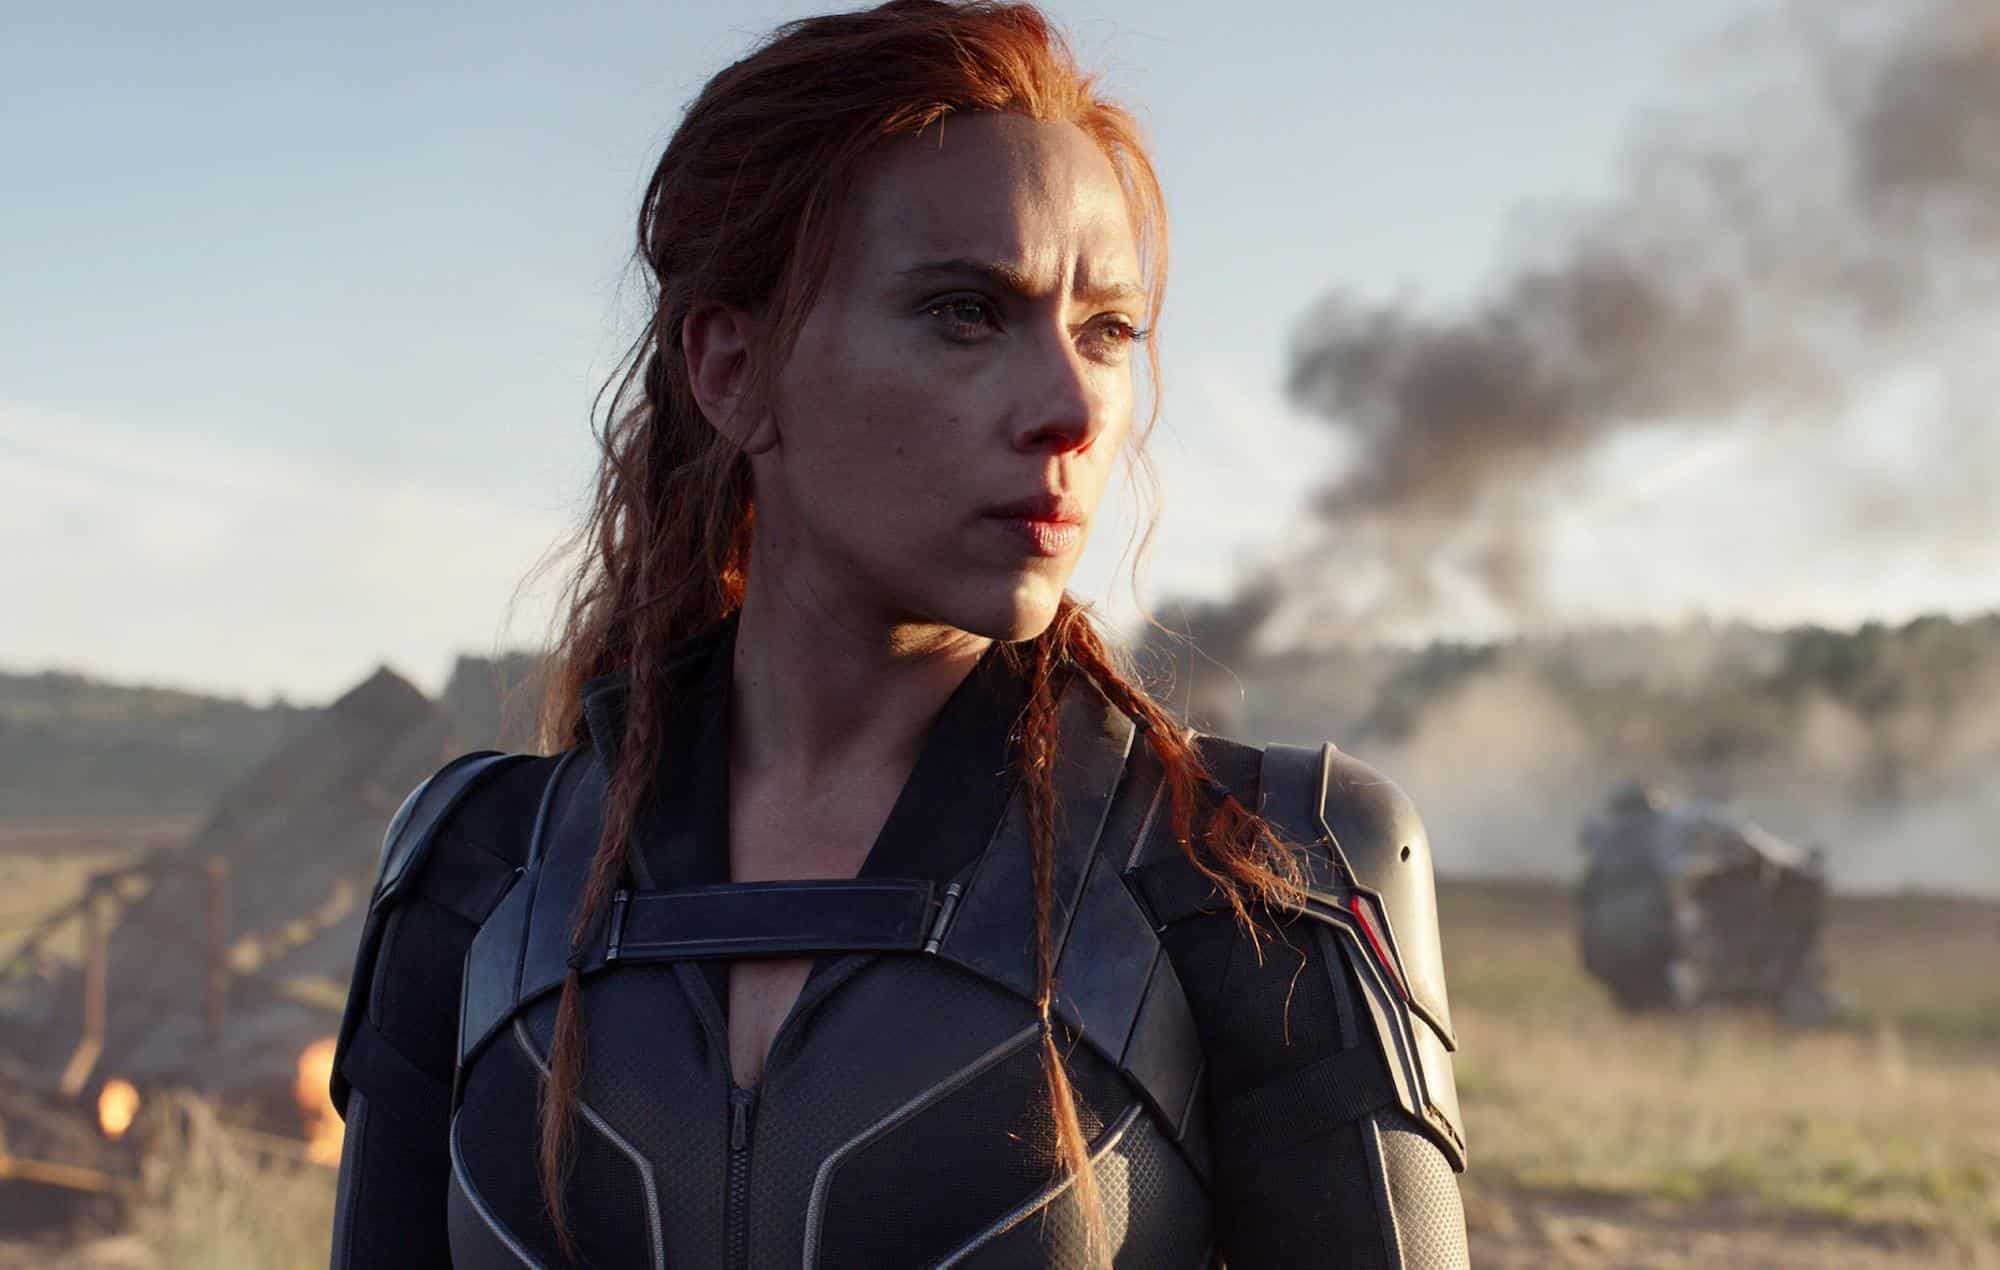 Disney accused of gendered character attack on Black Widow actress Scarlett Johansson